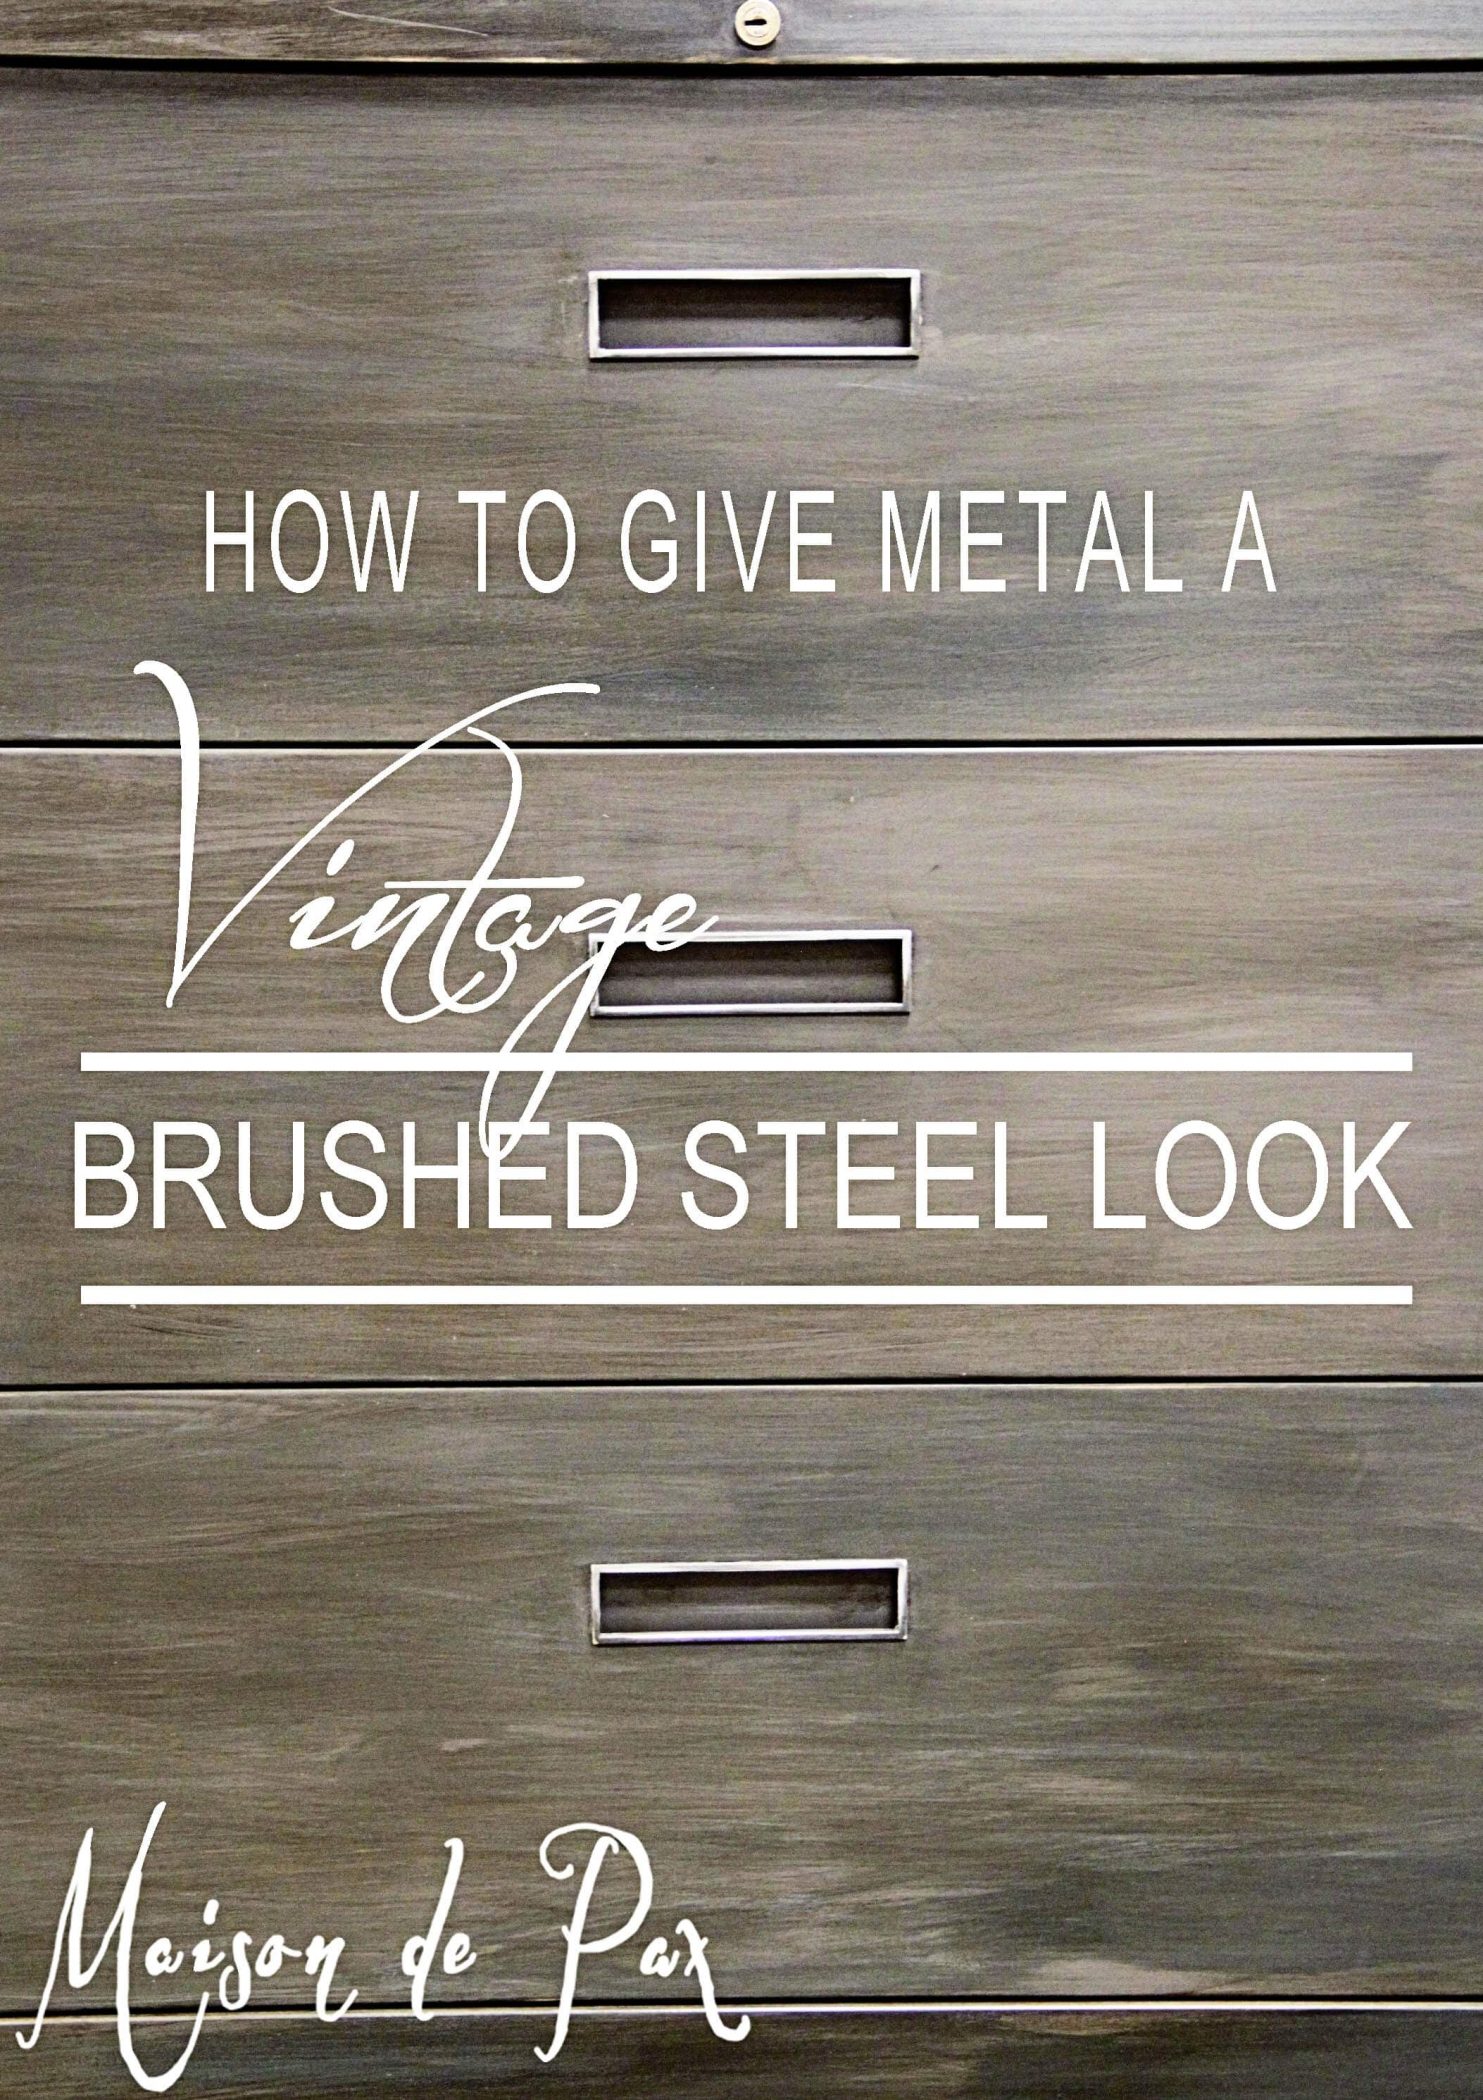 How to Give Metal a Brushed Steel Look